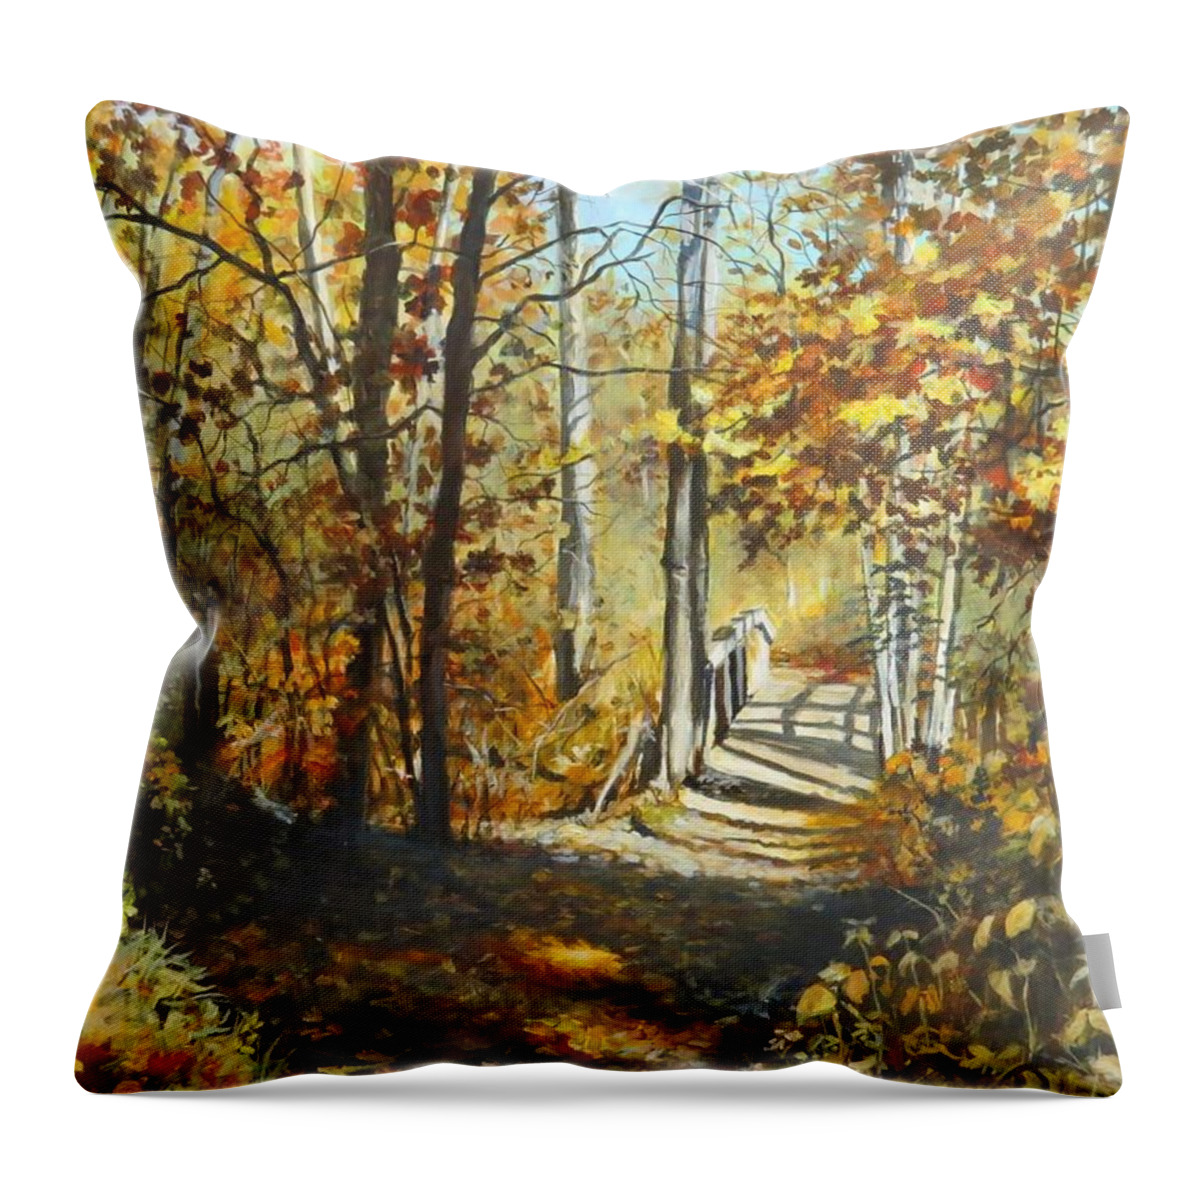 Landscape Throw Pillow featuring the painting Indian Summer Trail by William Brody